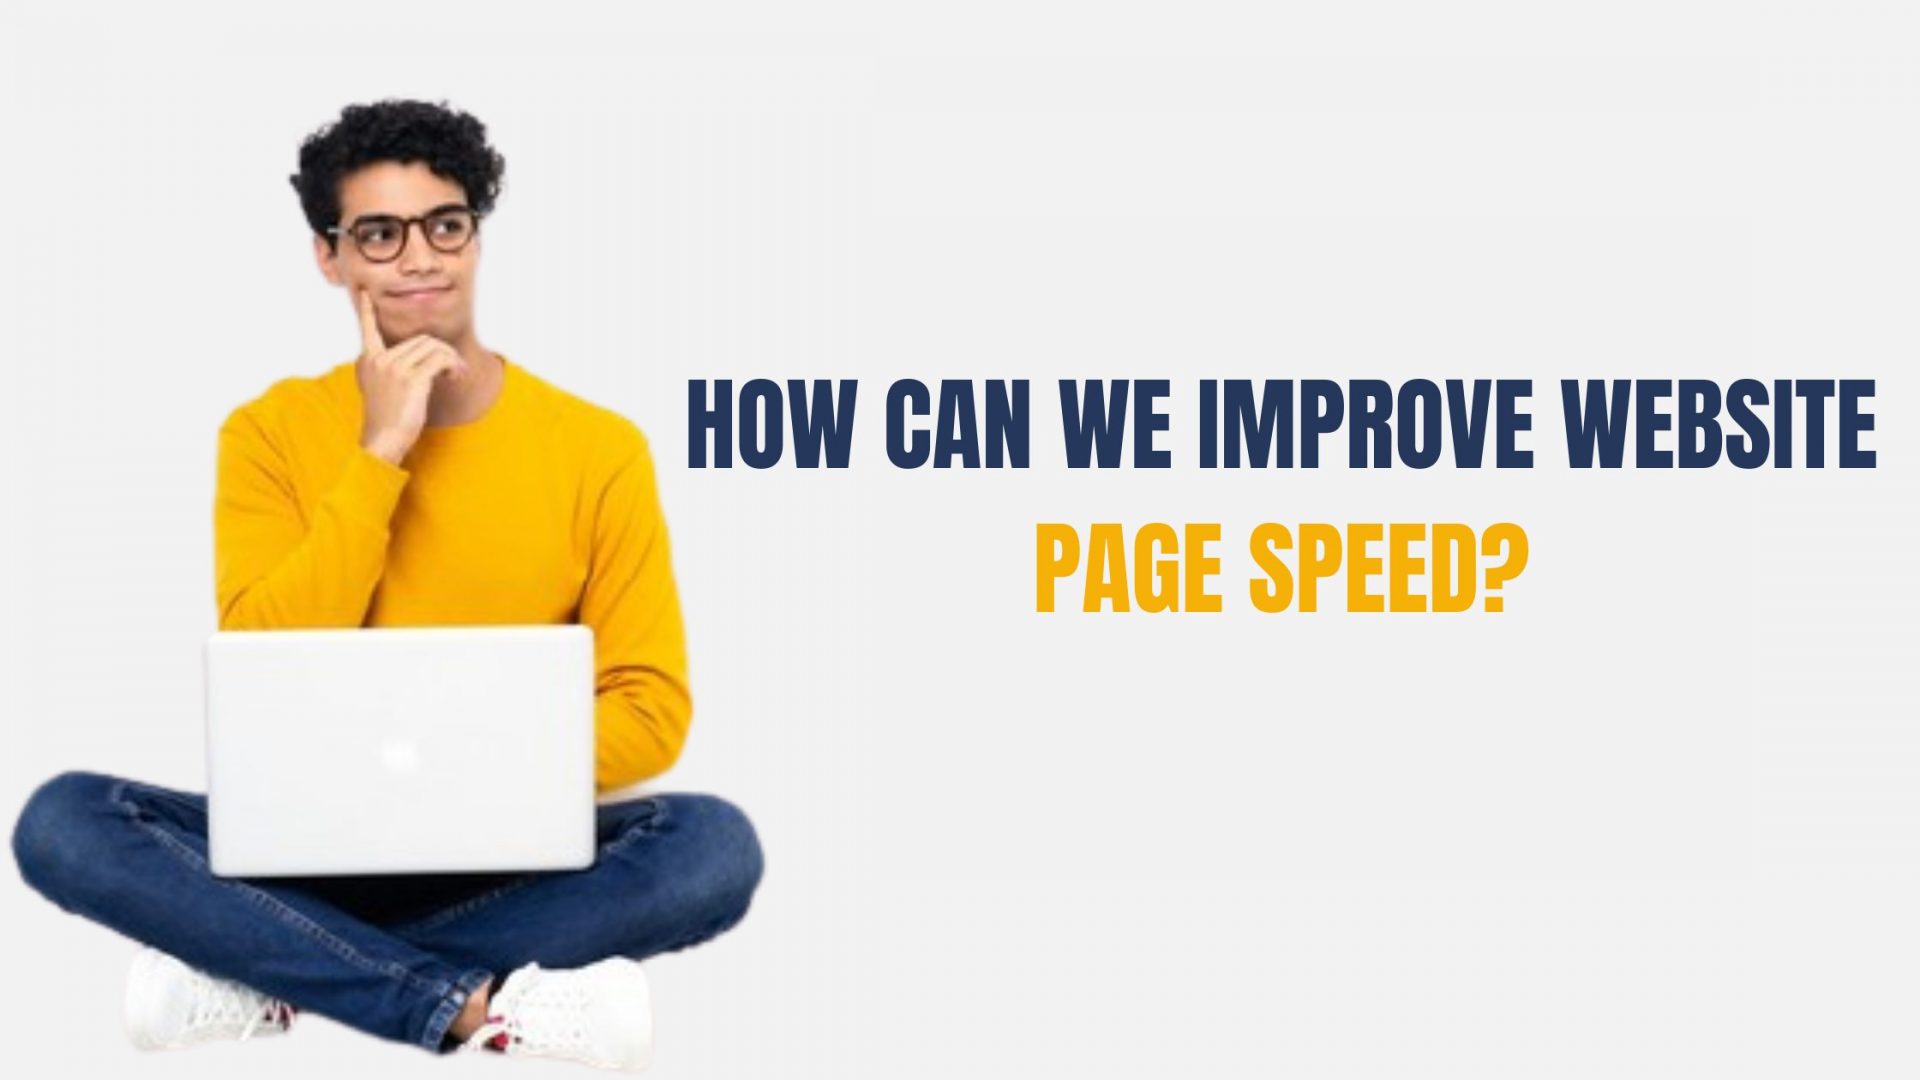 How can we improve website page speed